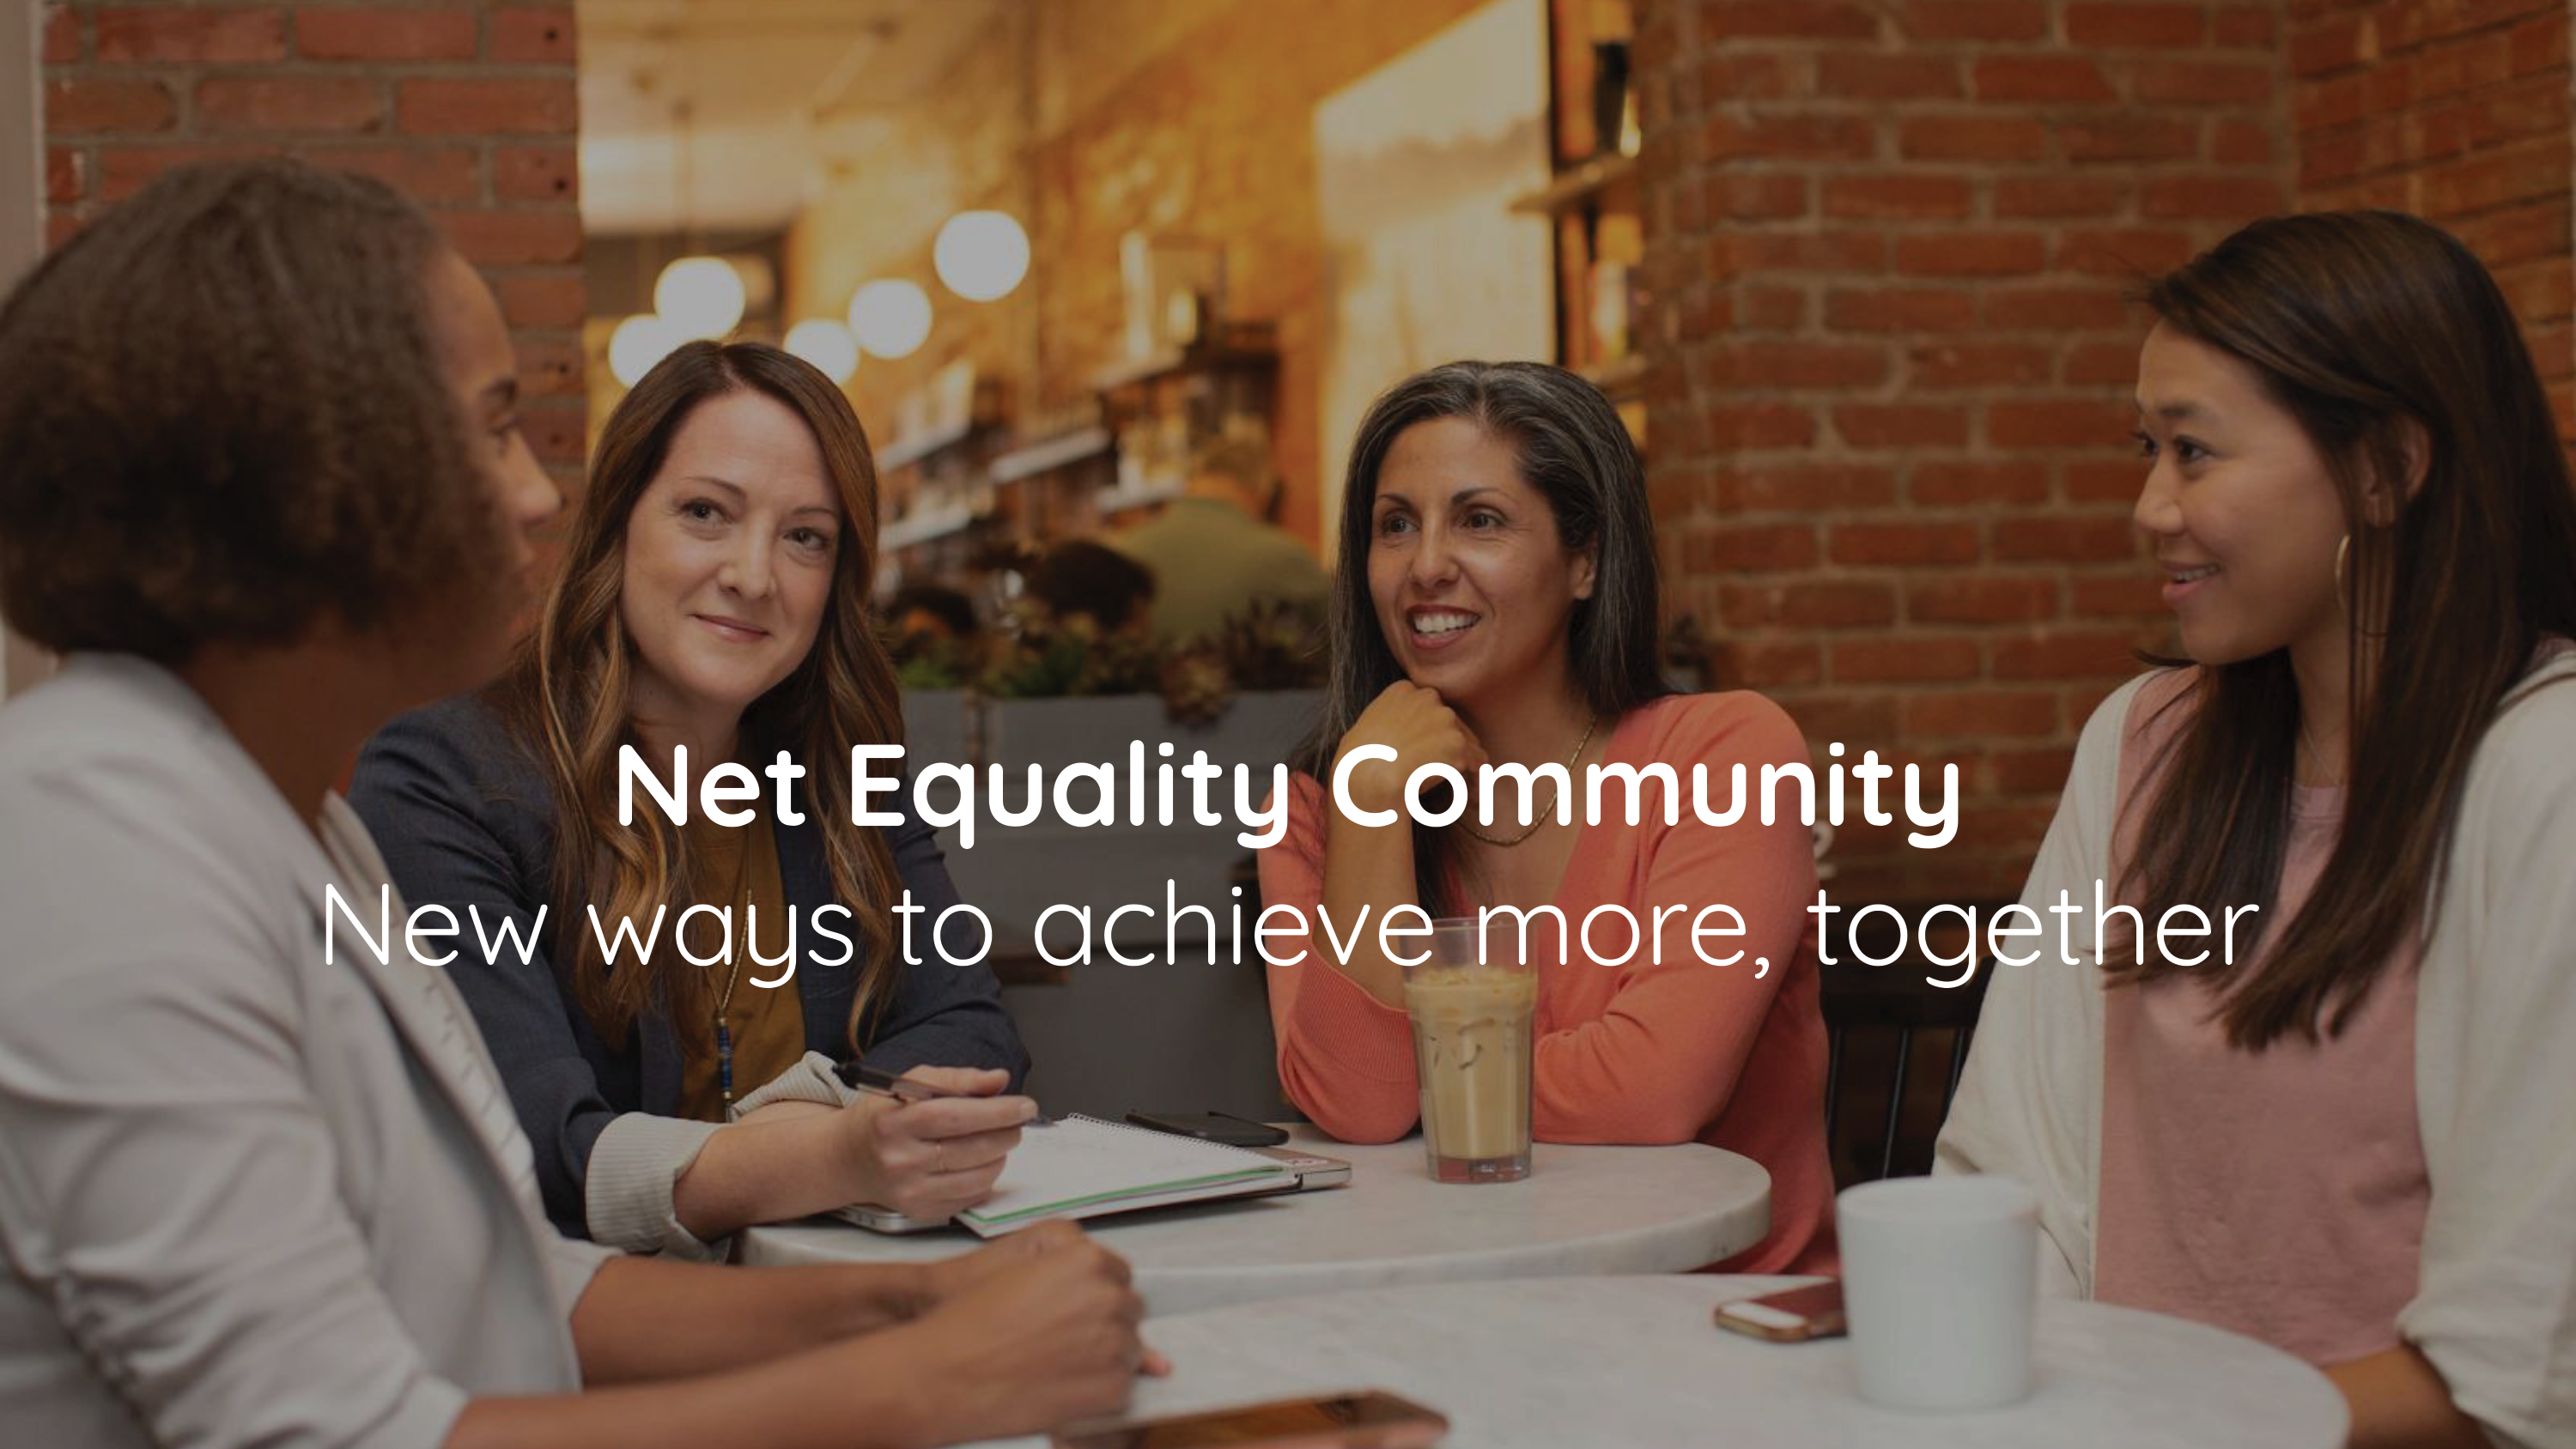 Photo of 4 women sitting around a table with text Net Equality Community: New Ways to Achieve more together.